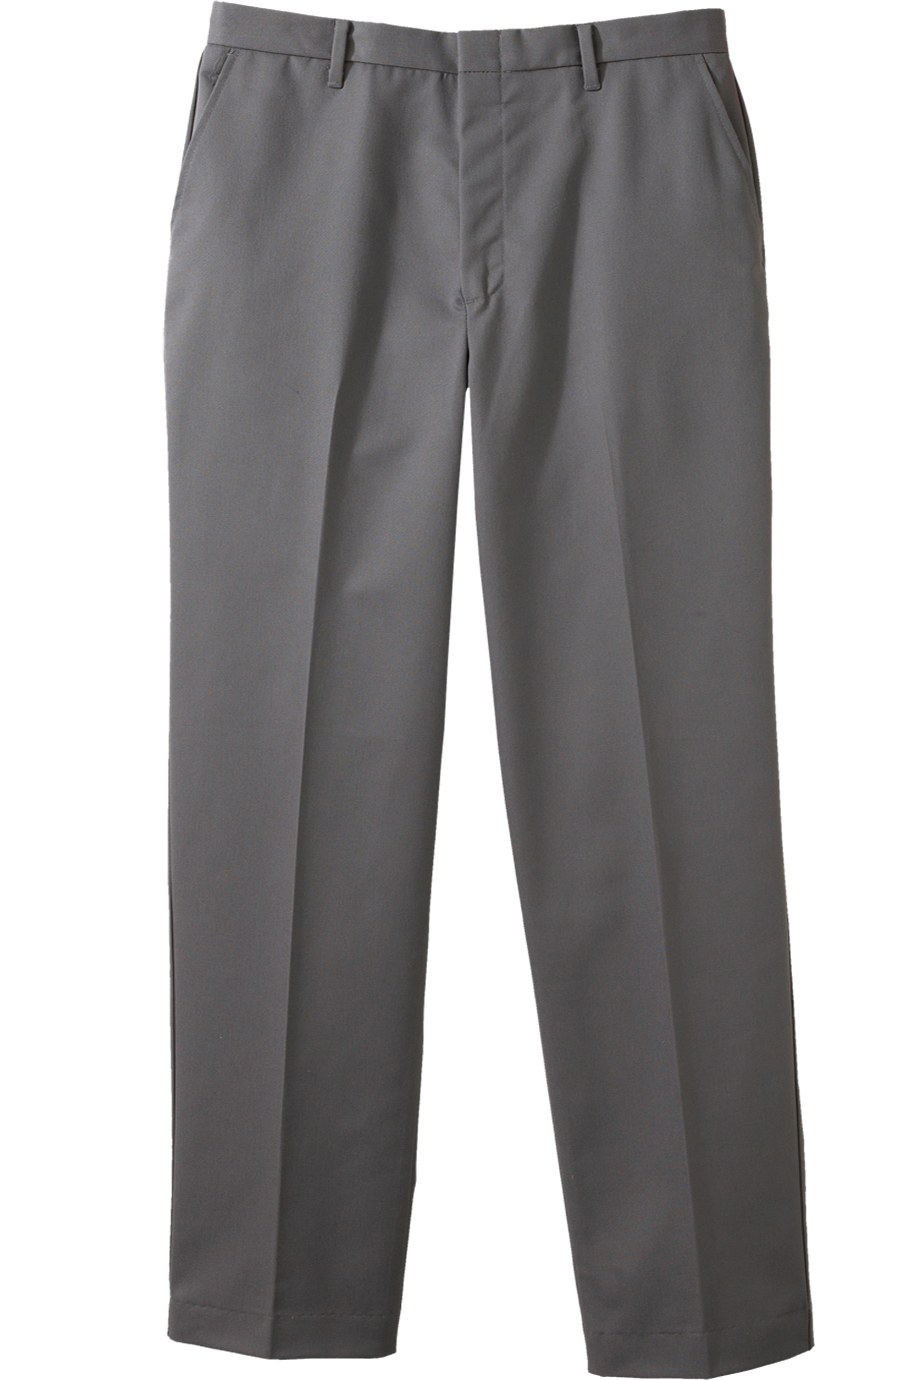 Edwards Big & Tall  Business Casual Flat Front Pant- Online Exclusive